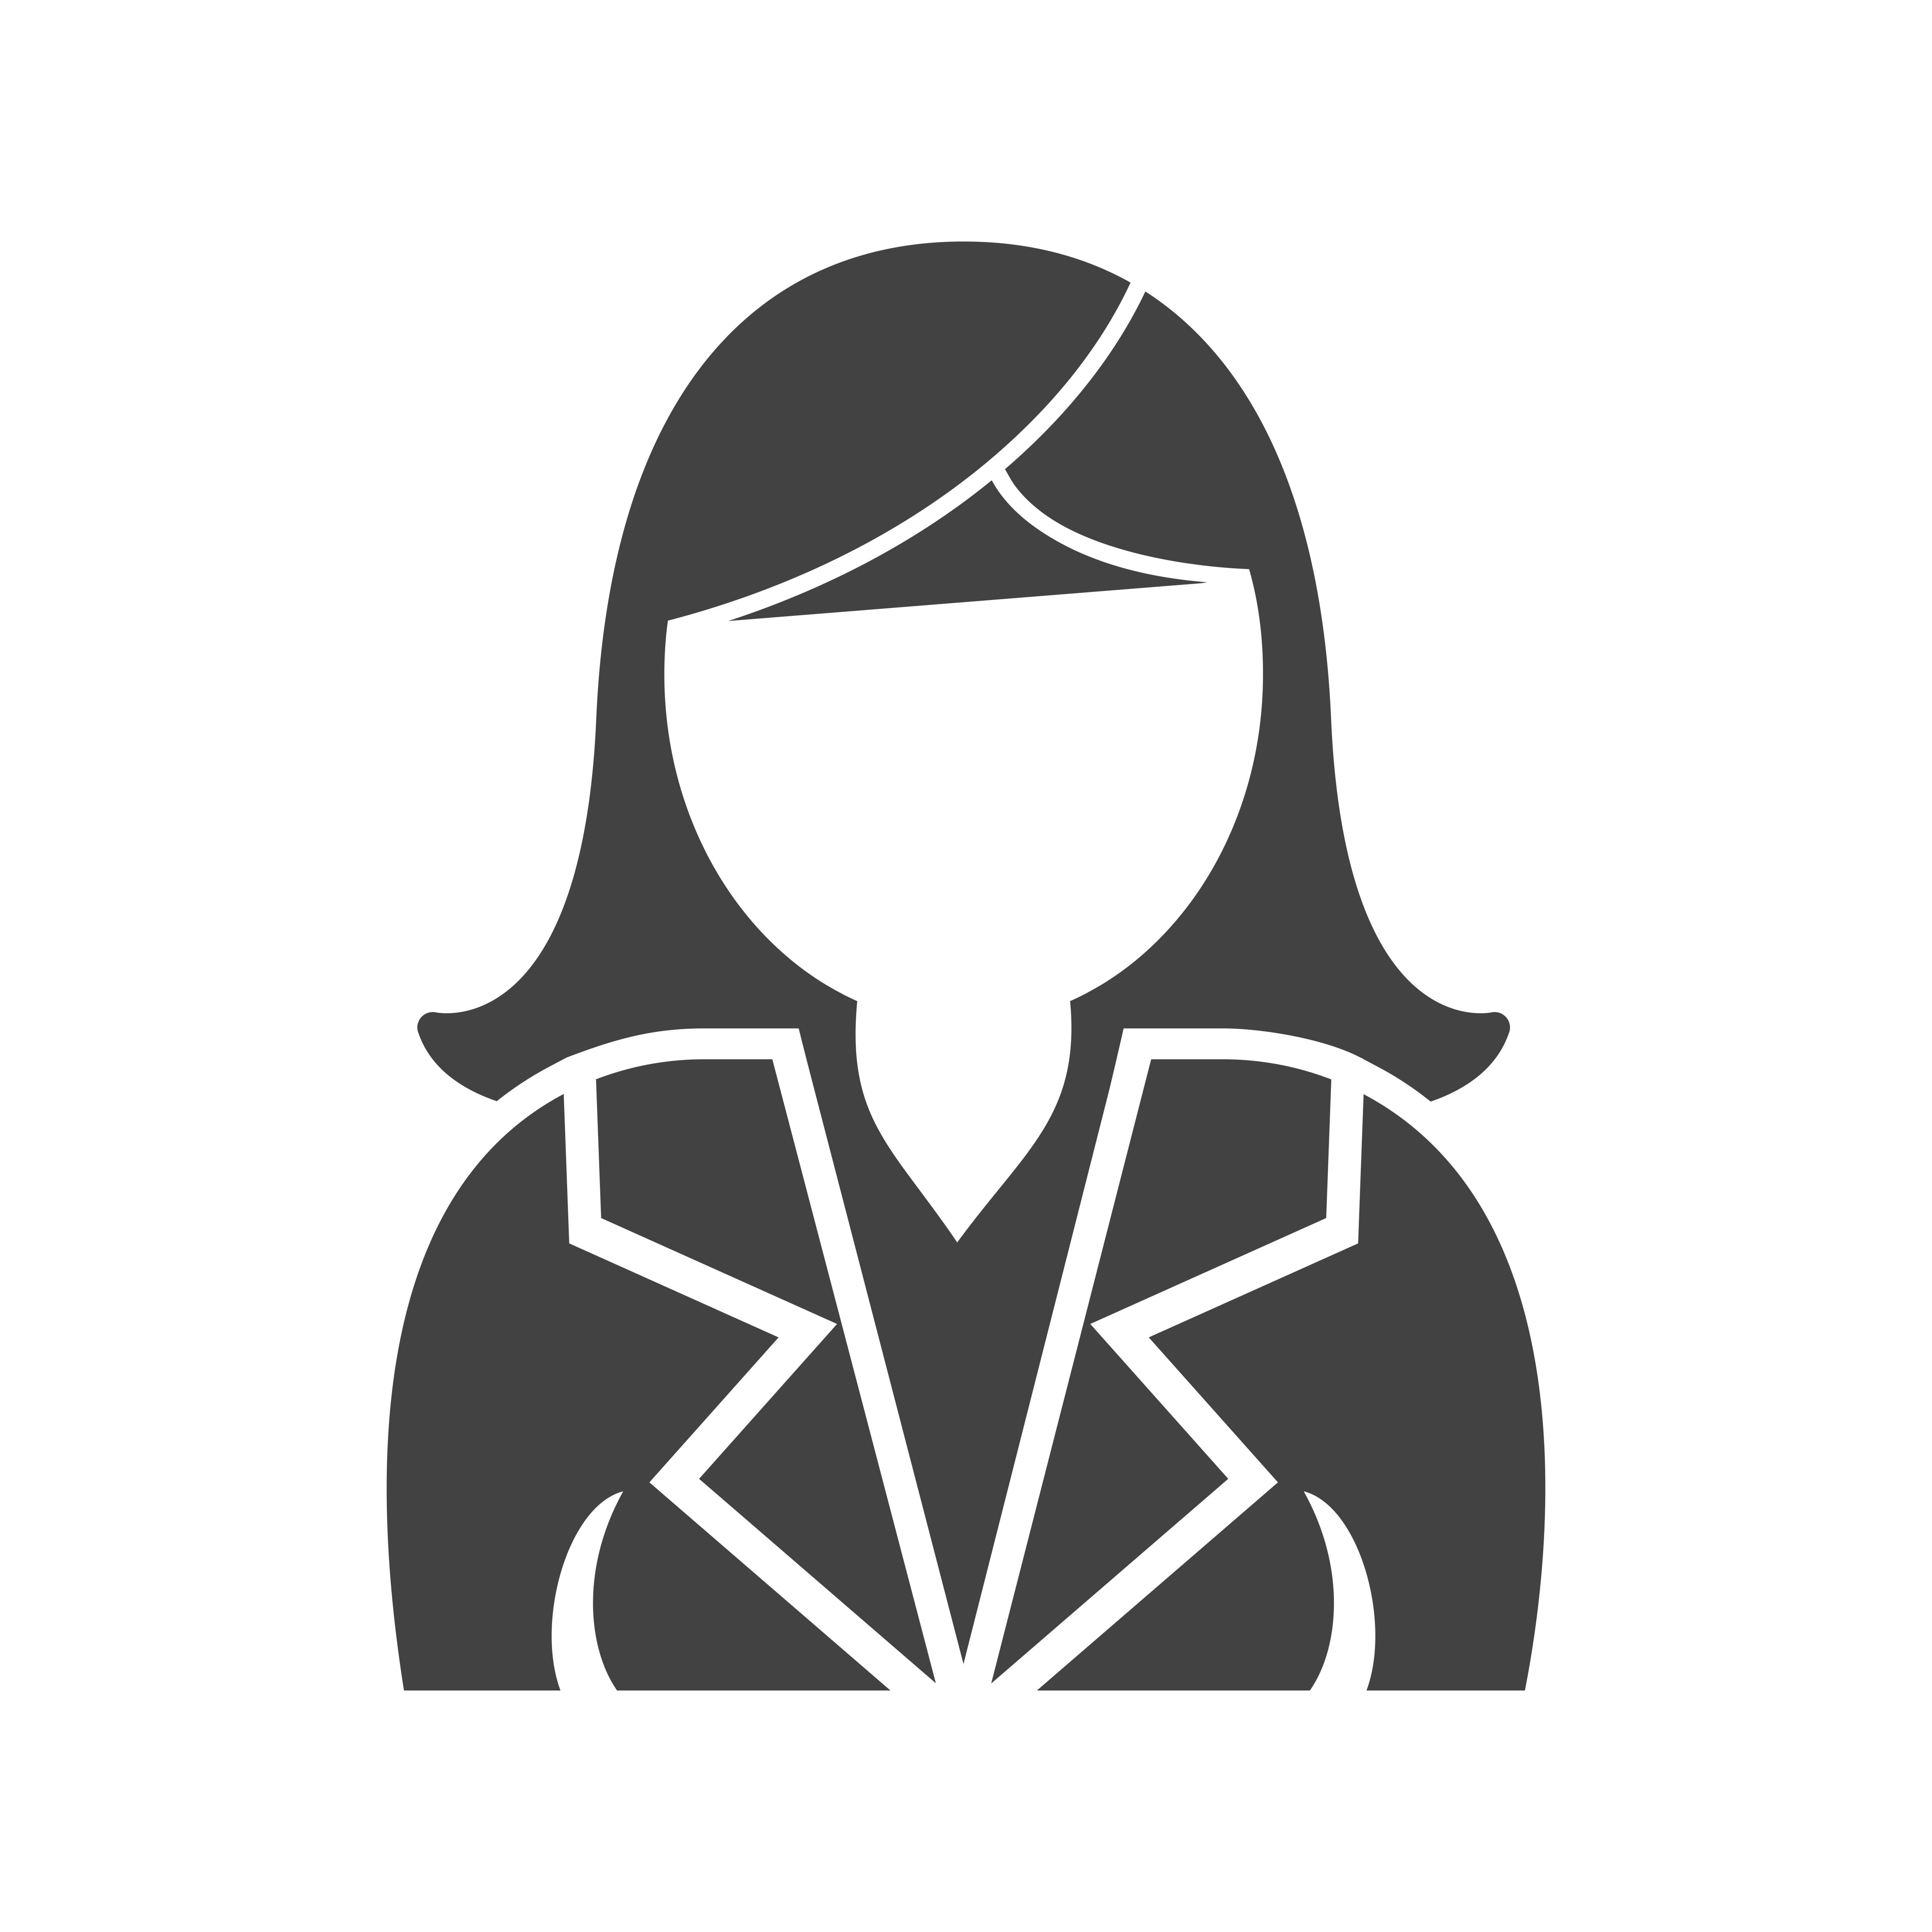 Download Business Woman Icon Free Vector Art - (4,468 Free Downloads)